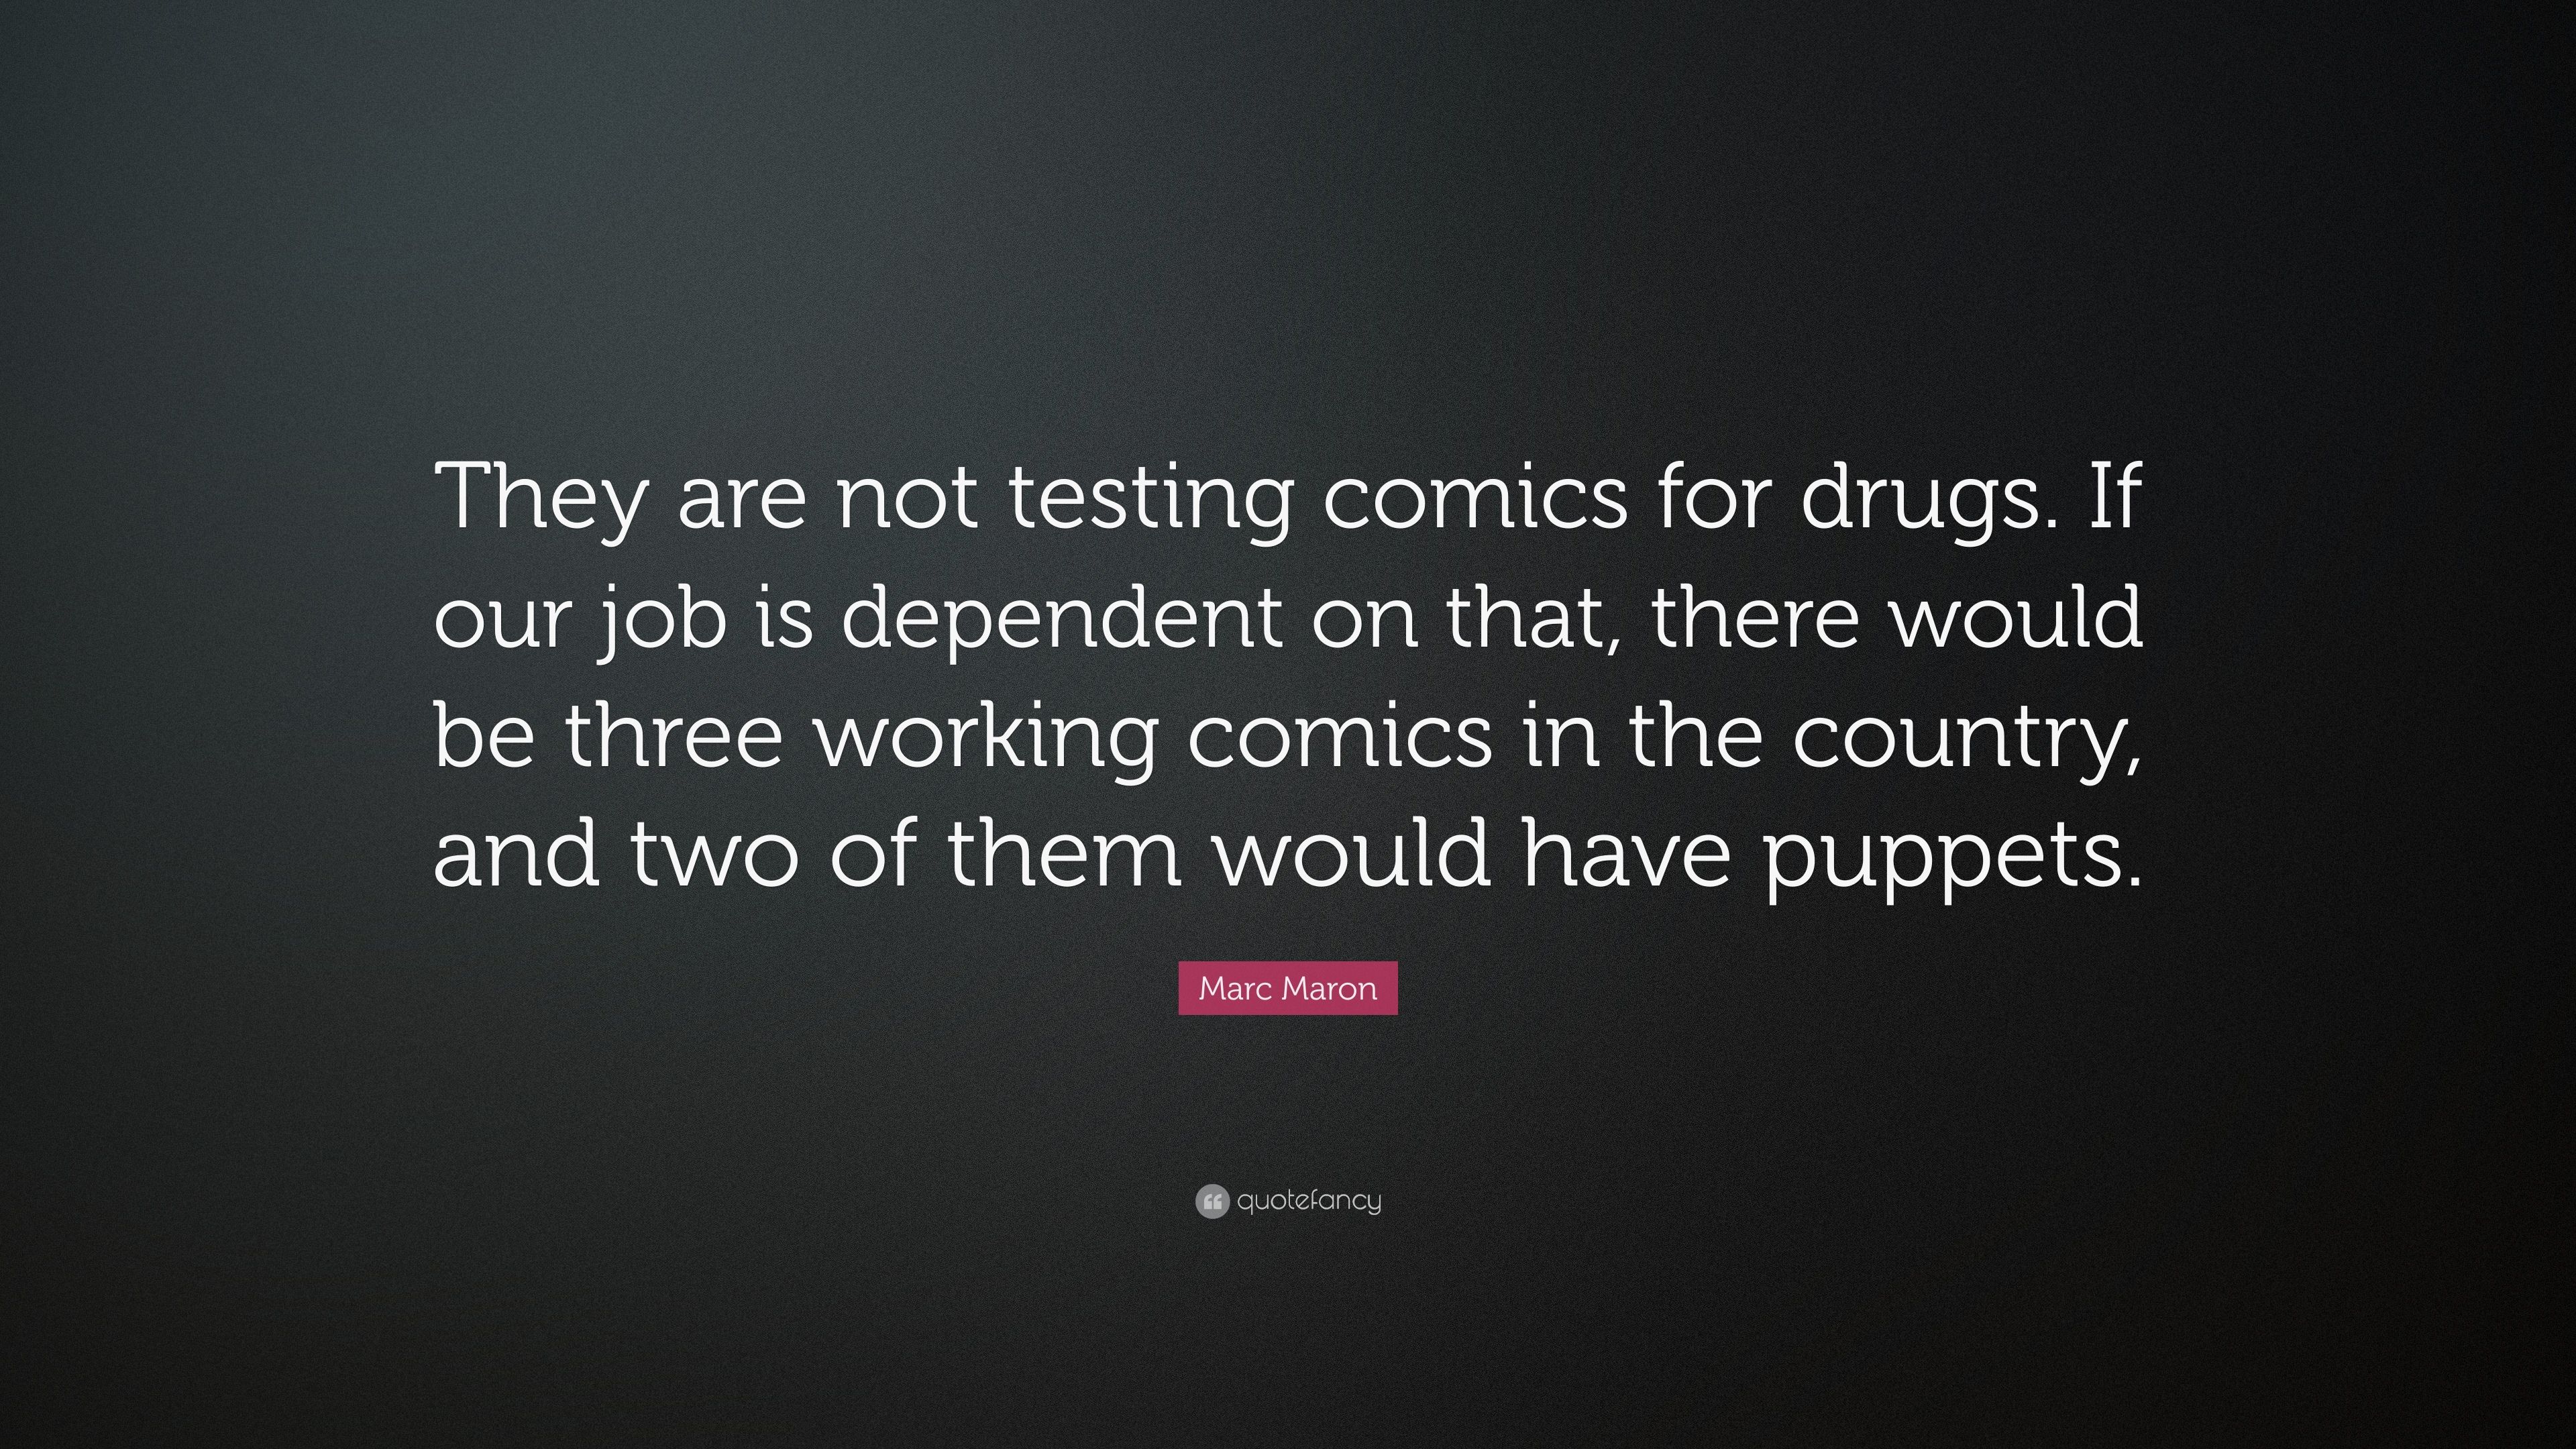 Marc Maron Quote: “They are not testing comics for drugs. If our job